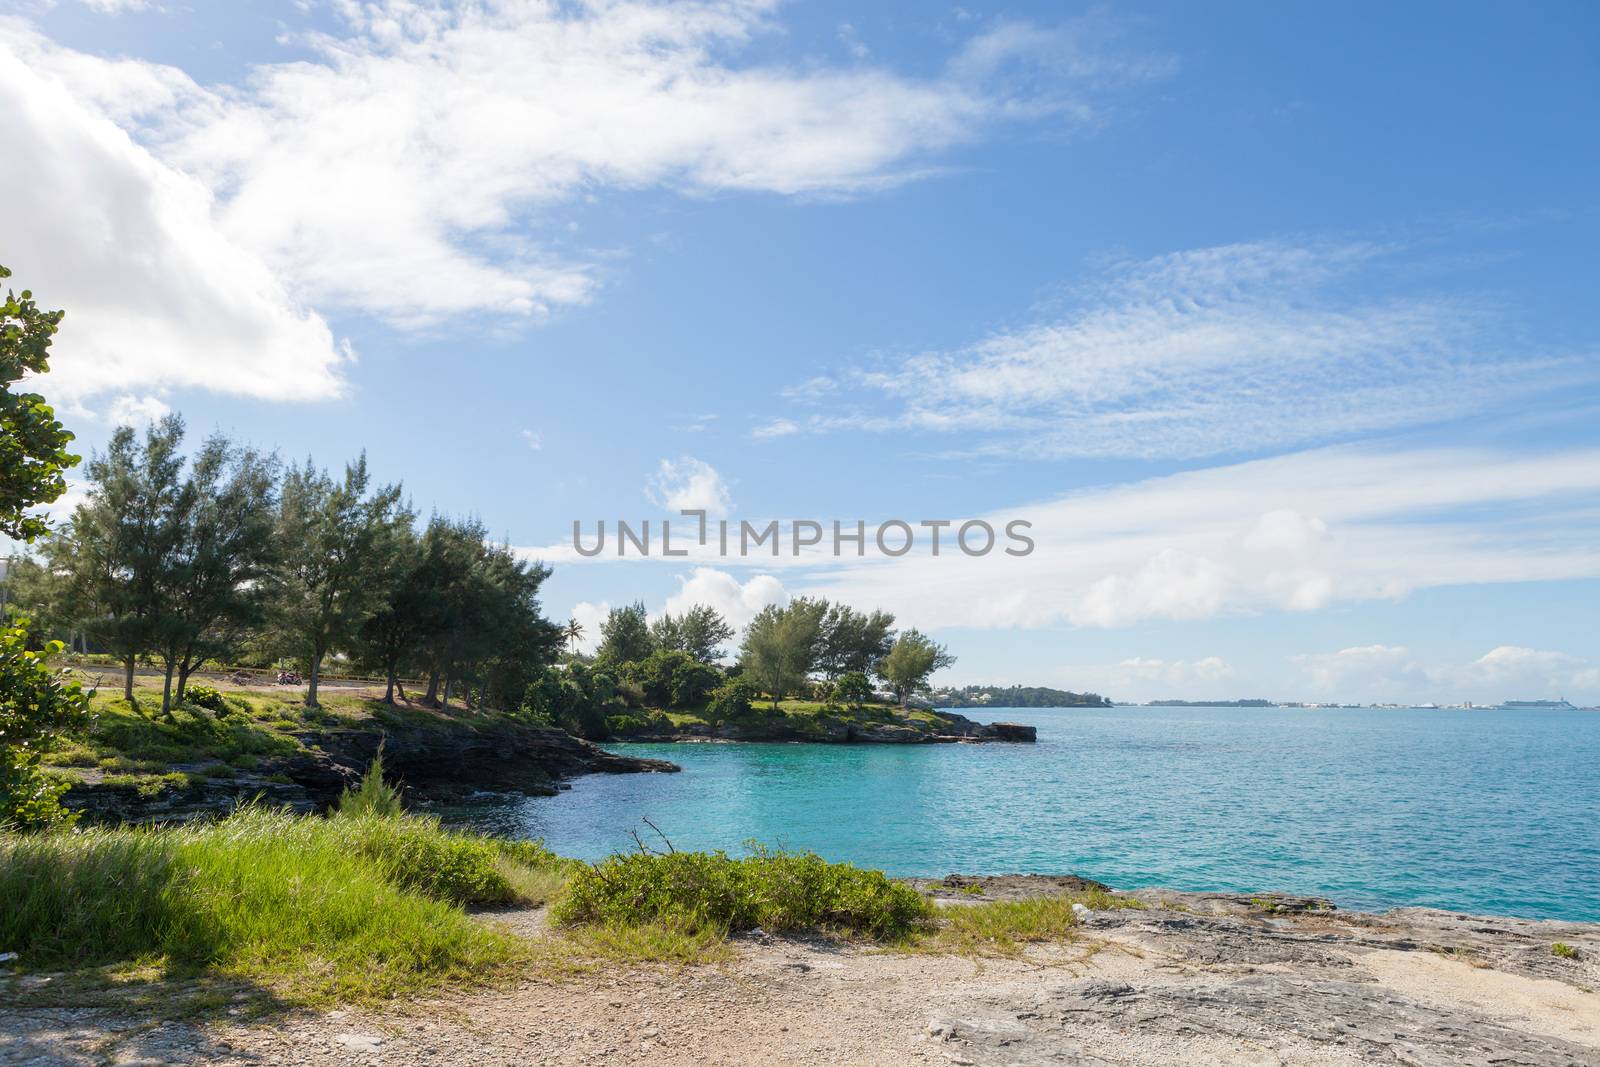 Bermuda coast with aqua blue tropical waters and rock formations complete with small caves.